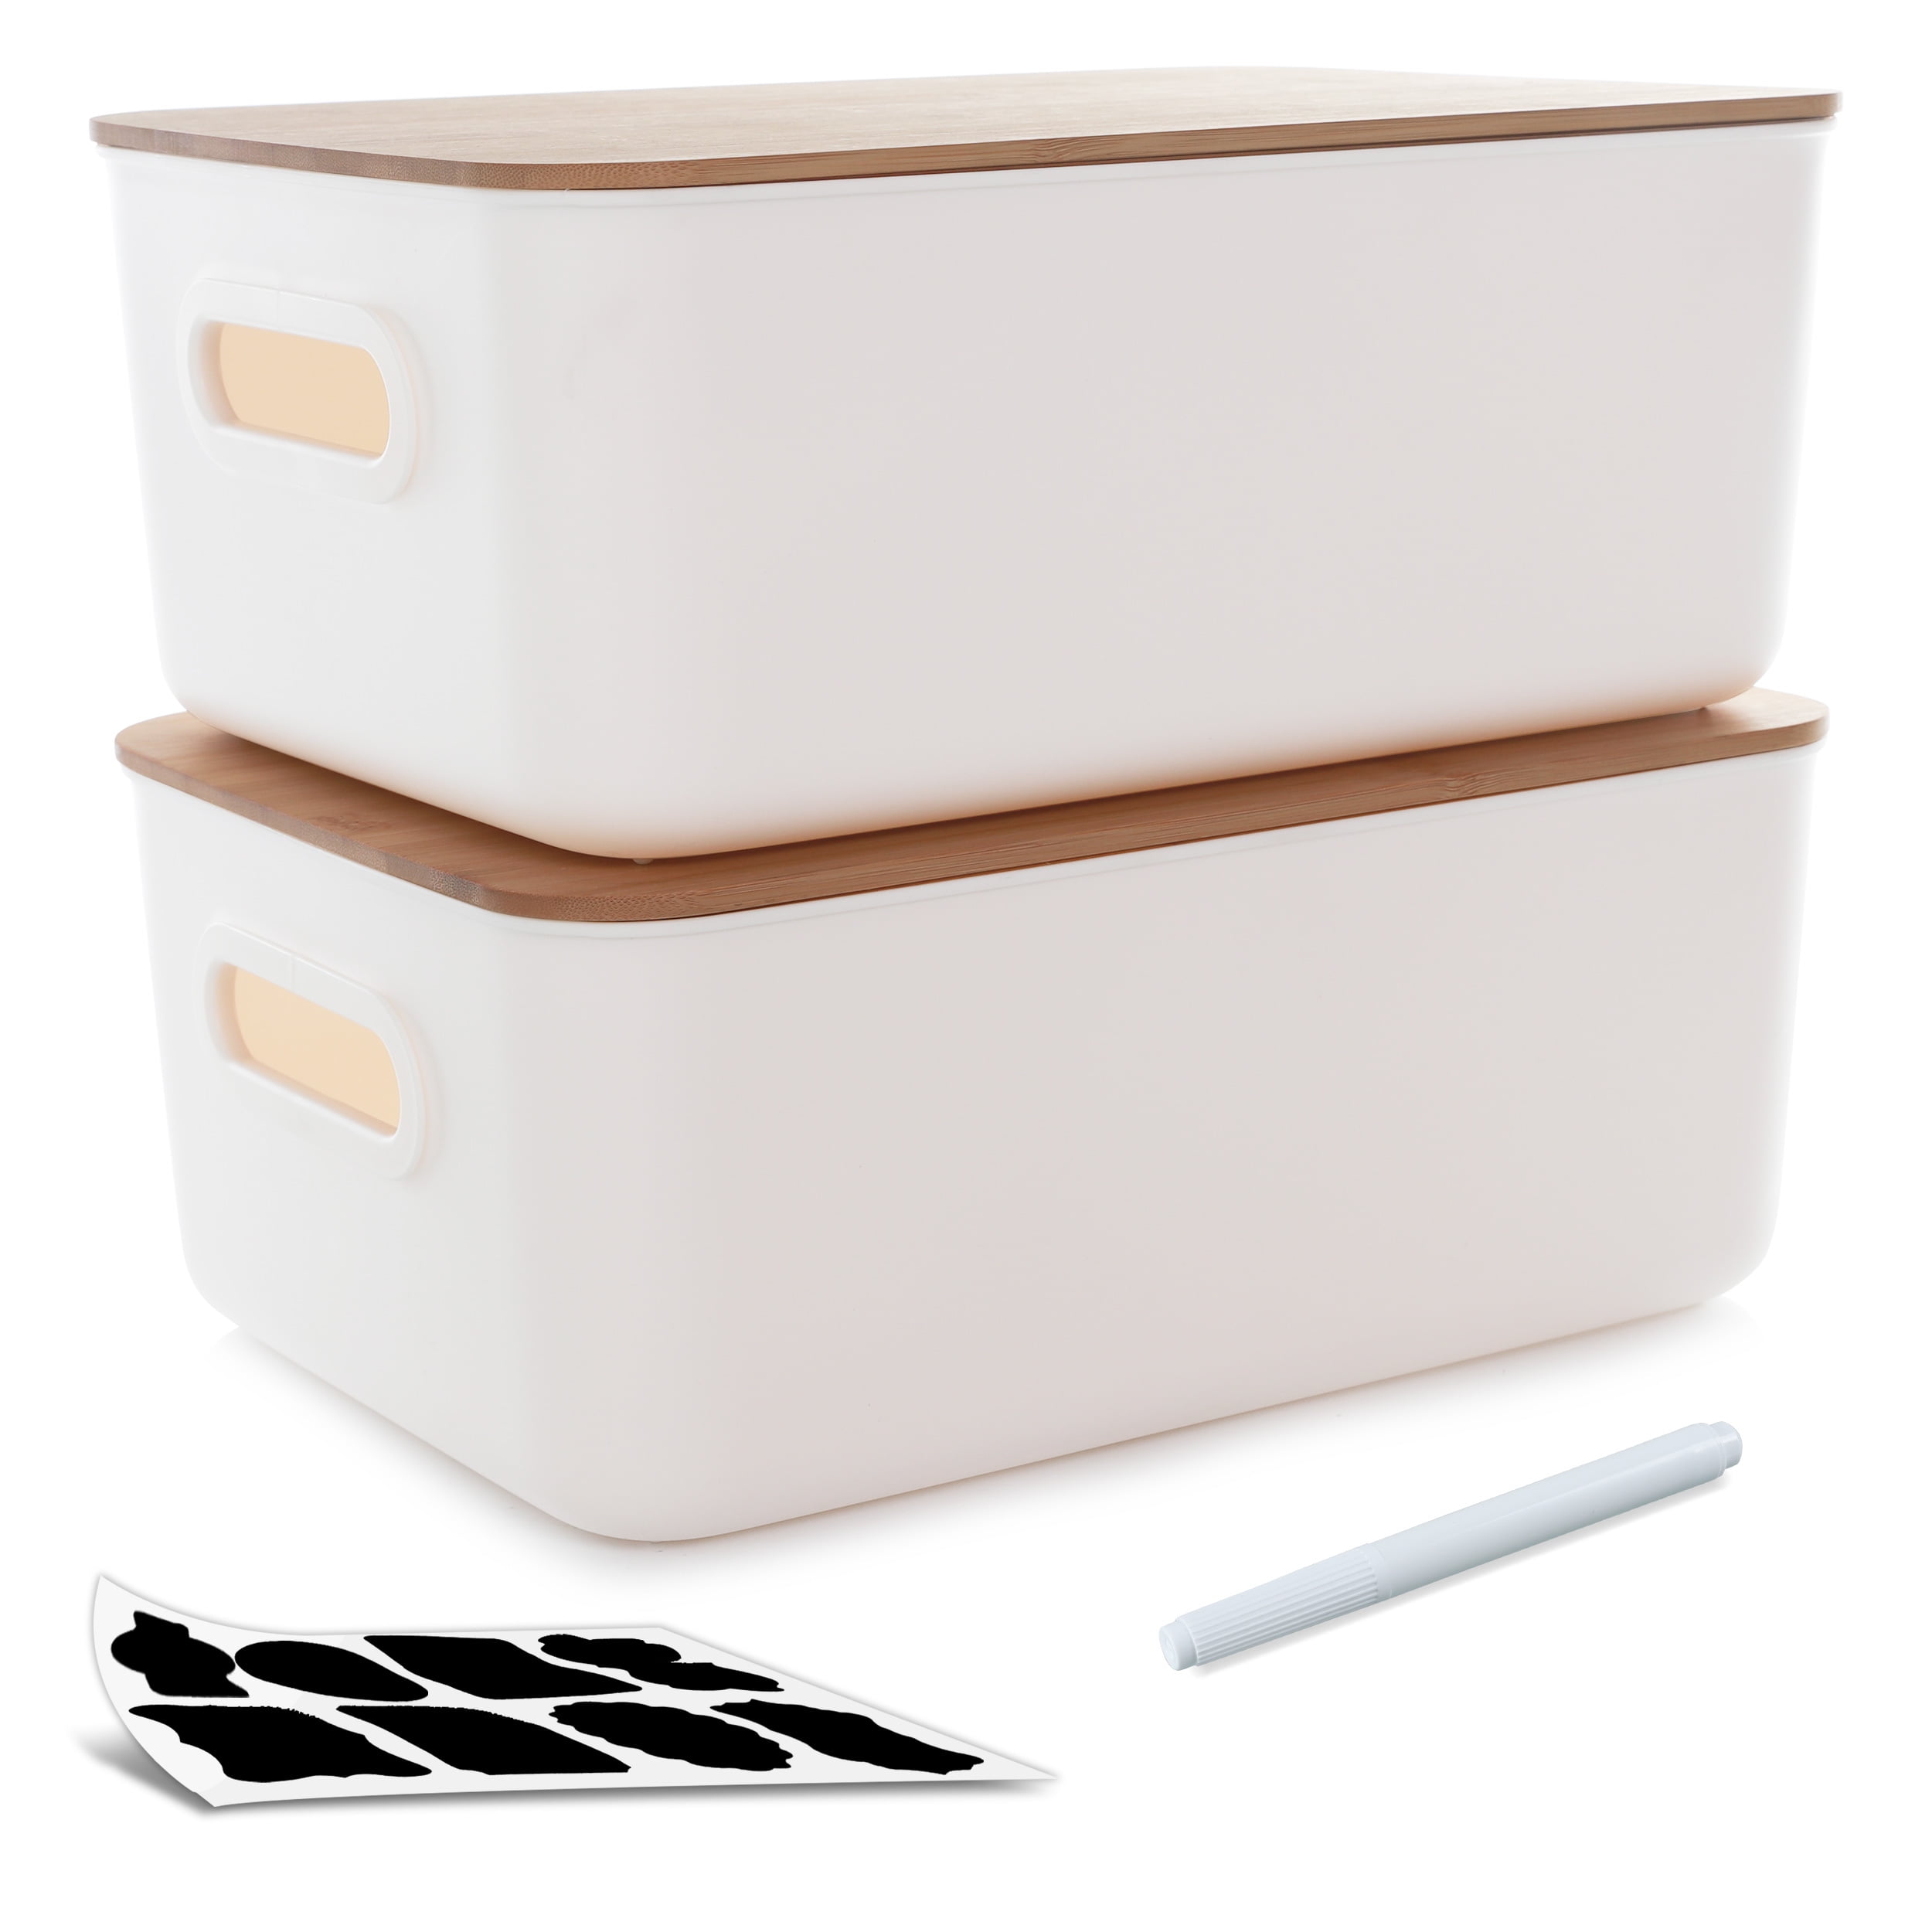  Qilinba 2 Pcs Bliss Bins with Lids, Acrylic Storage Container  with External Handles for Organizing Bread, Snack, Chips